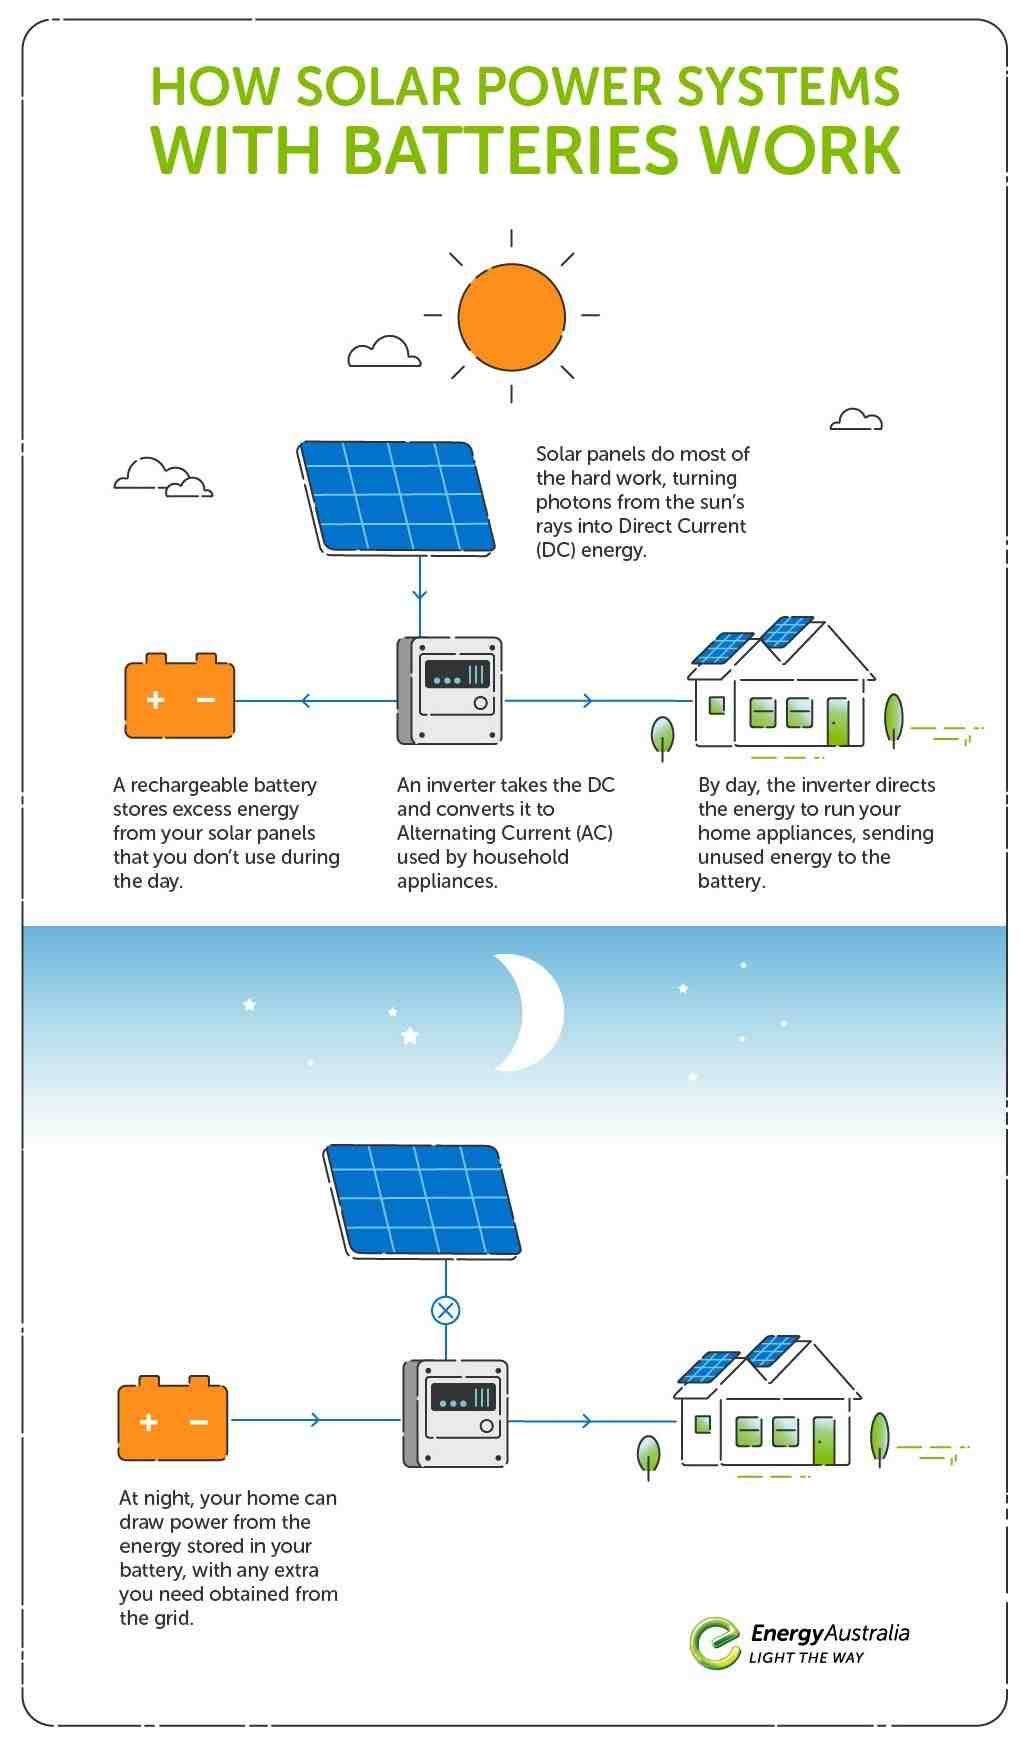 What is the biggest problem with solar energy?